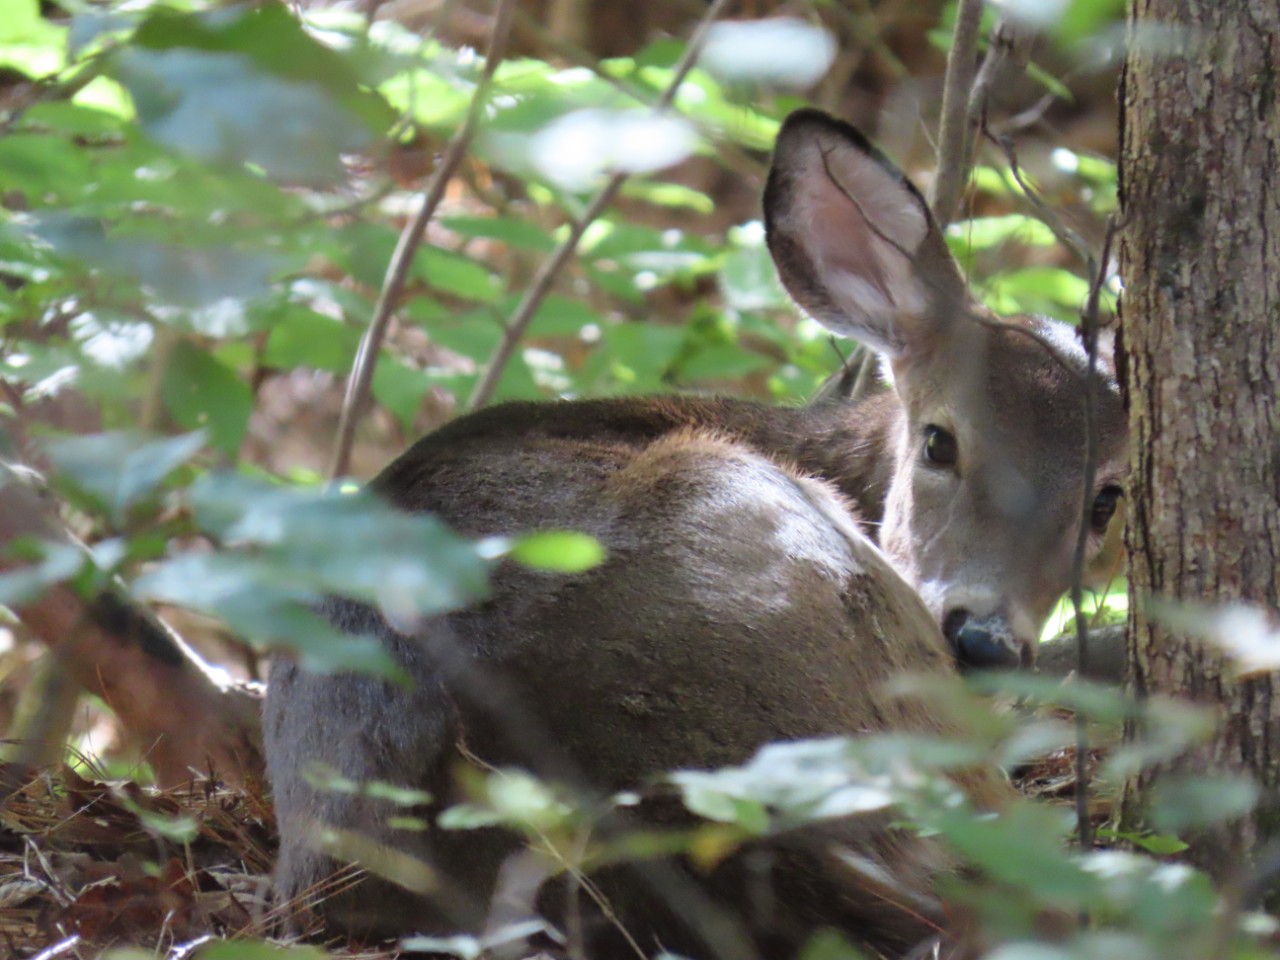 A deer is curled up at the base on a tree in a forest, surrounded by foliage. The deer looks right at the camera